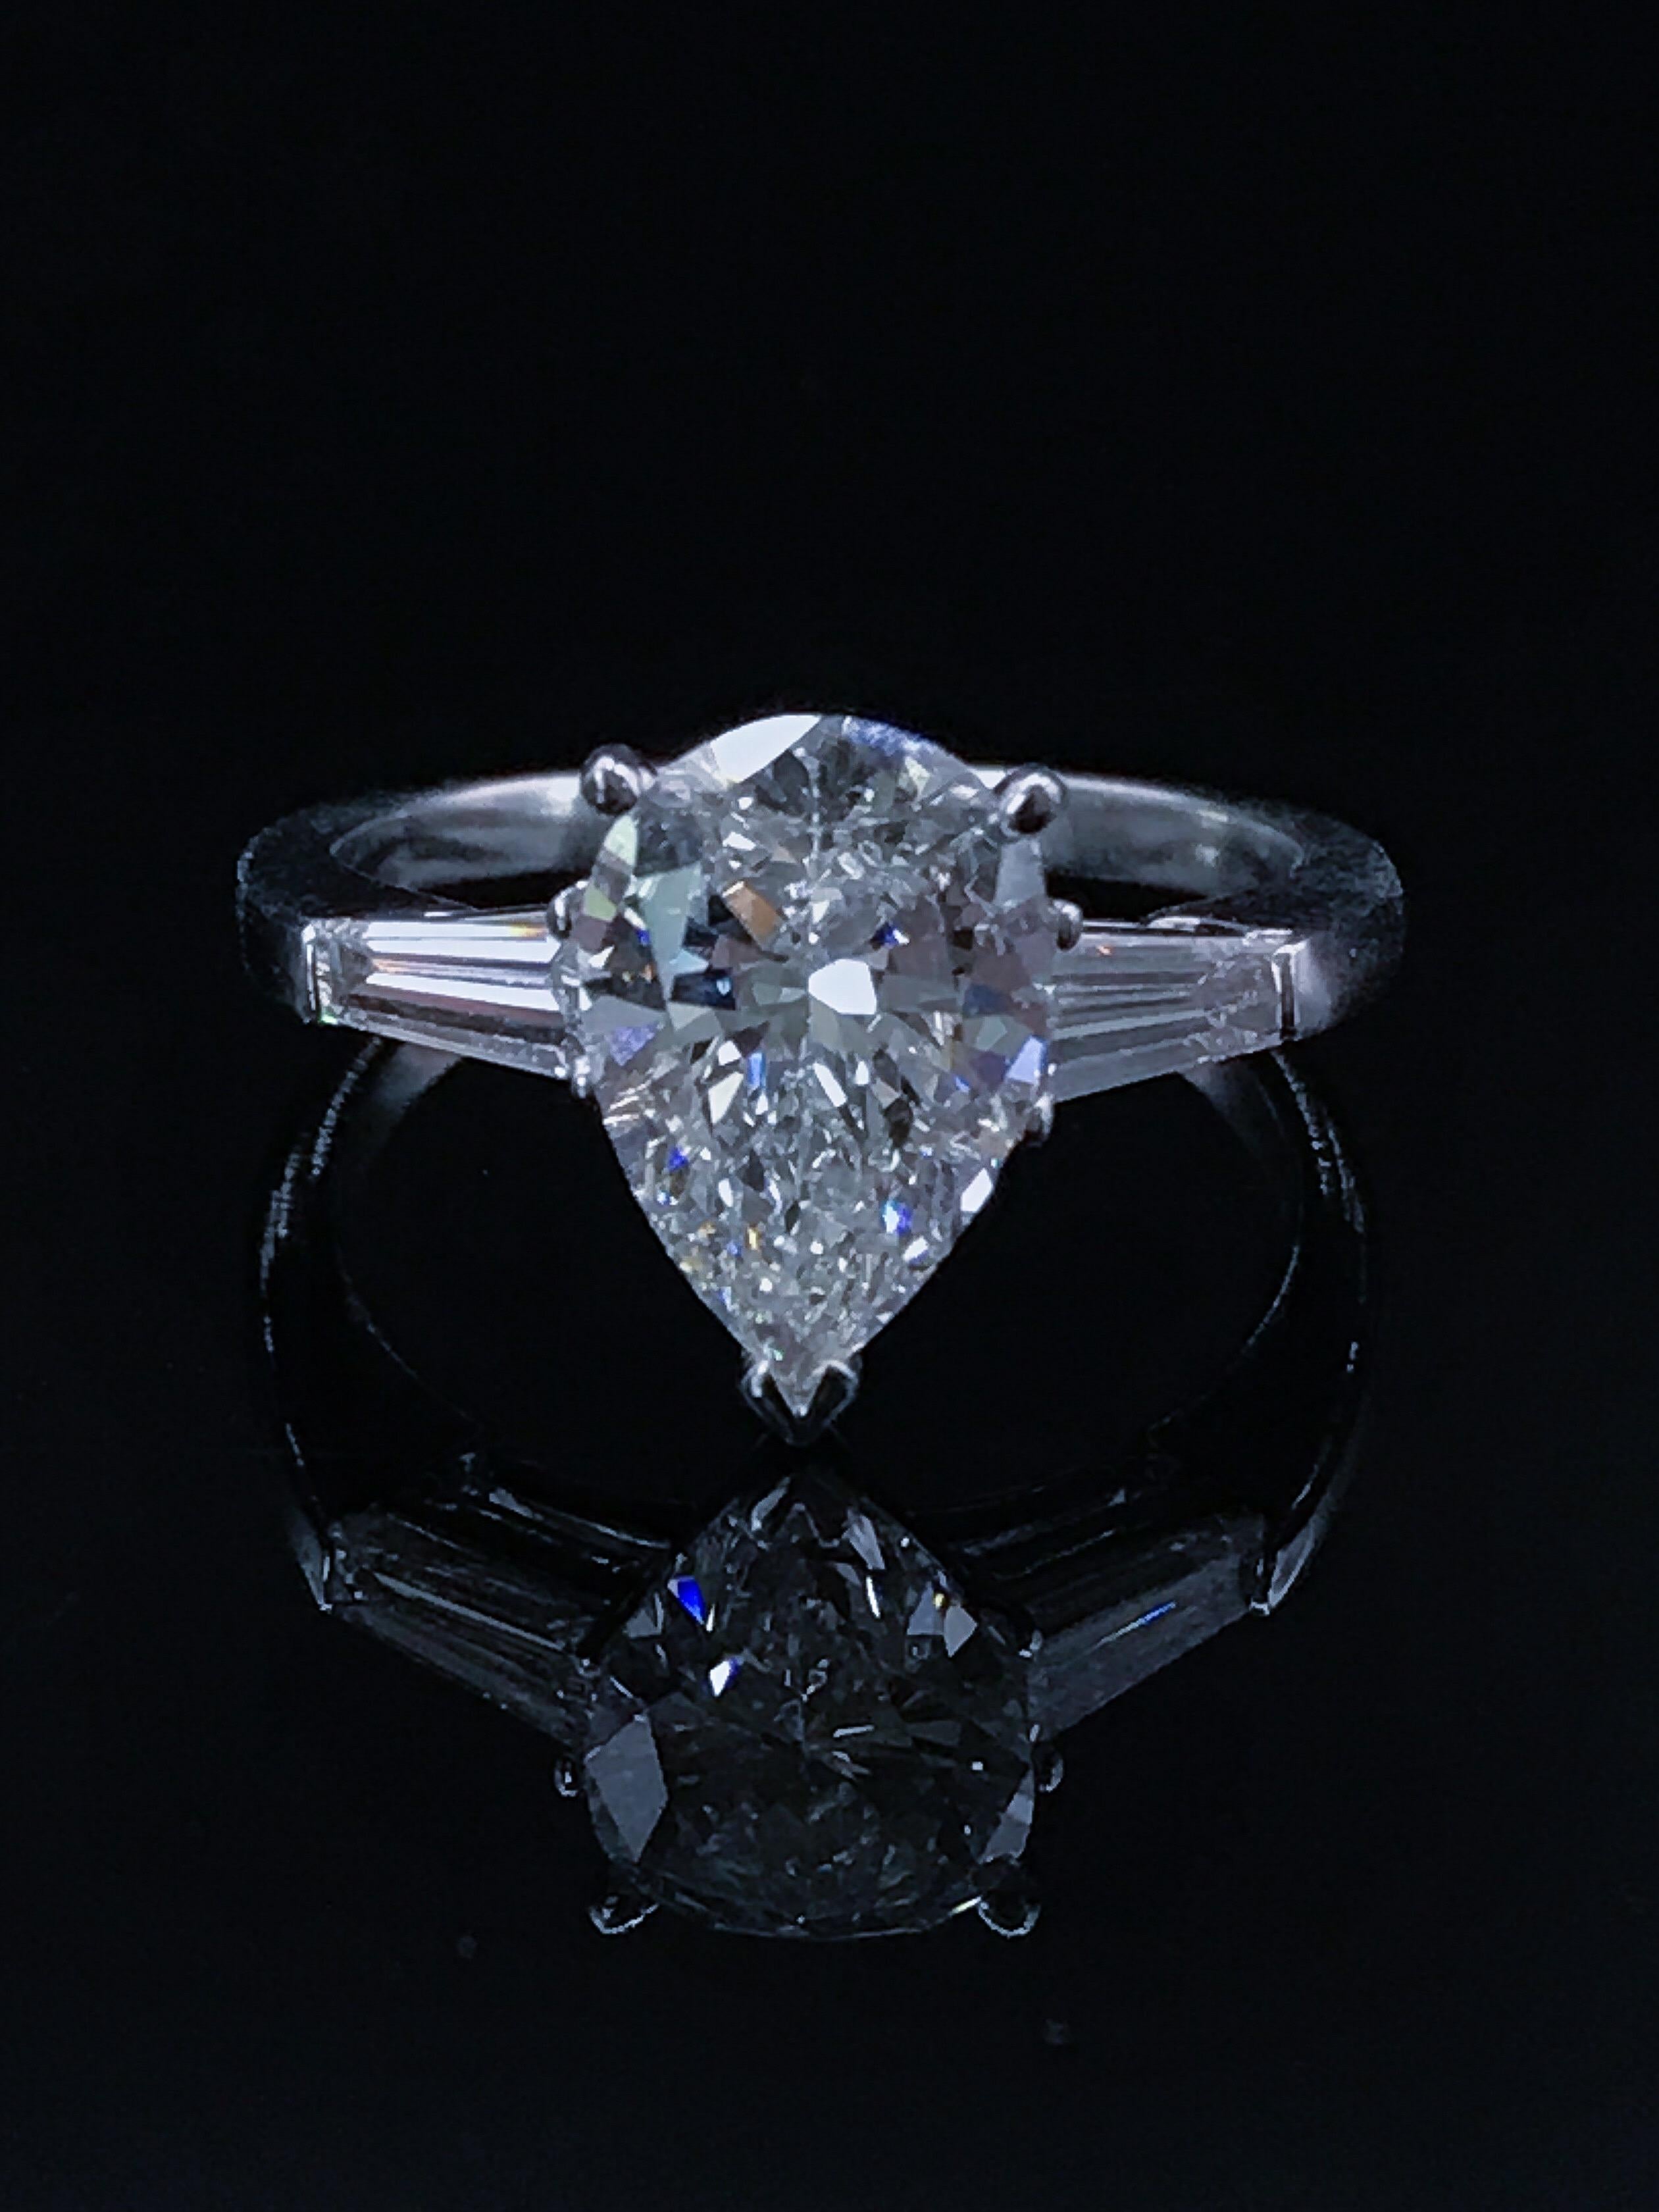 Custom Made 2.07ct Fine Quality Pear Shape G VVS2 GIA Platinum Diamond ring. Set with 0.43ct tapered baguette diamonds. Beautiful G color, vibrant, extremely clean. Custom made in Platinum with one of the finest jewelers.
GIA Certified center stone